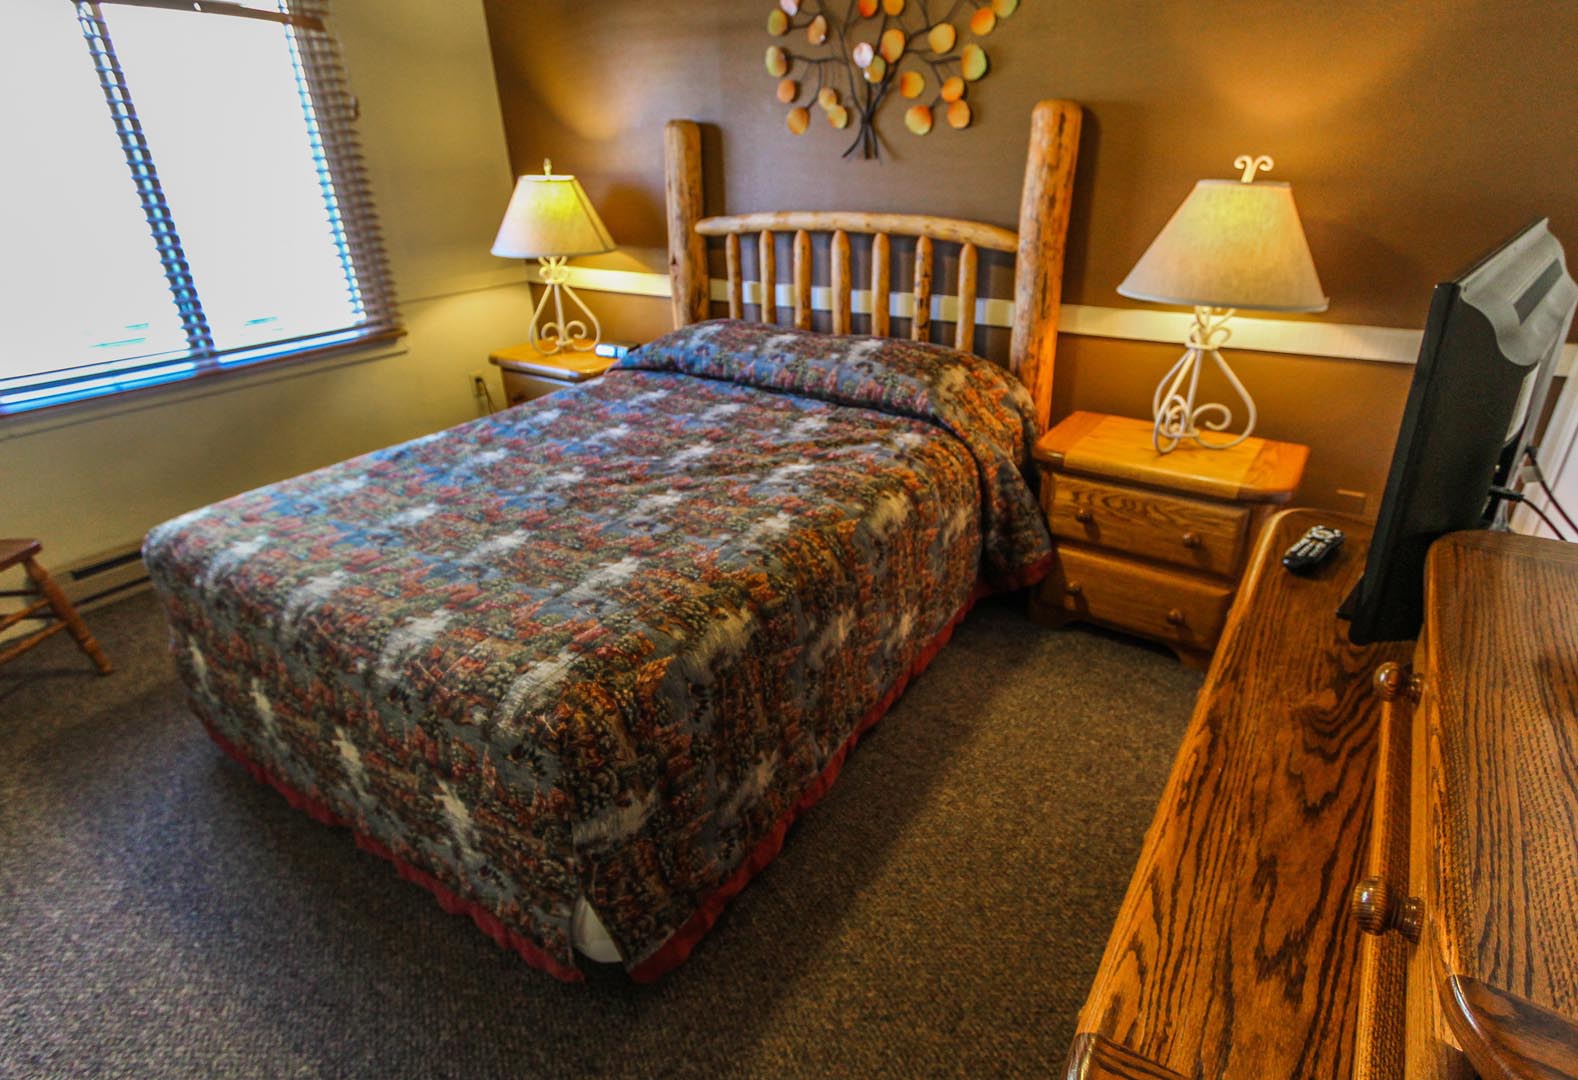 A master bedroom at VRI's Jackson Hole Towncenter in Wyoming.